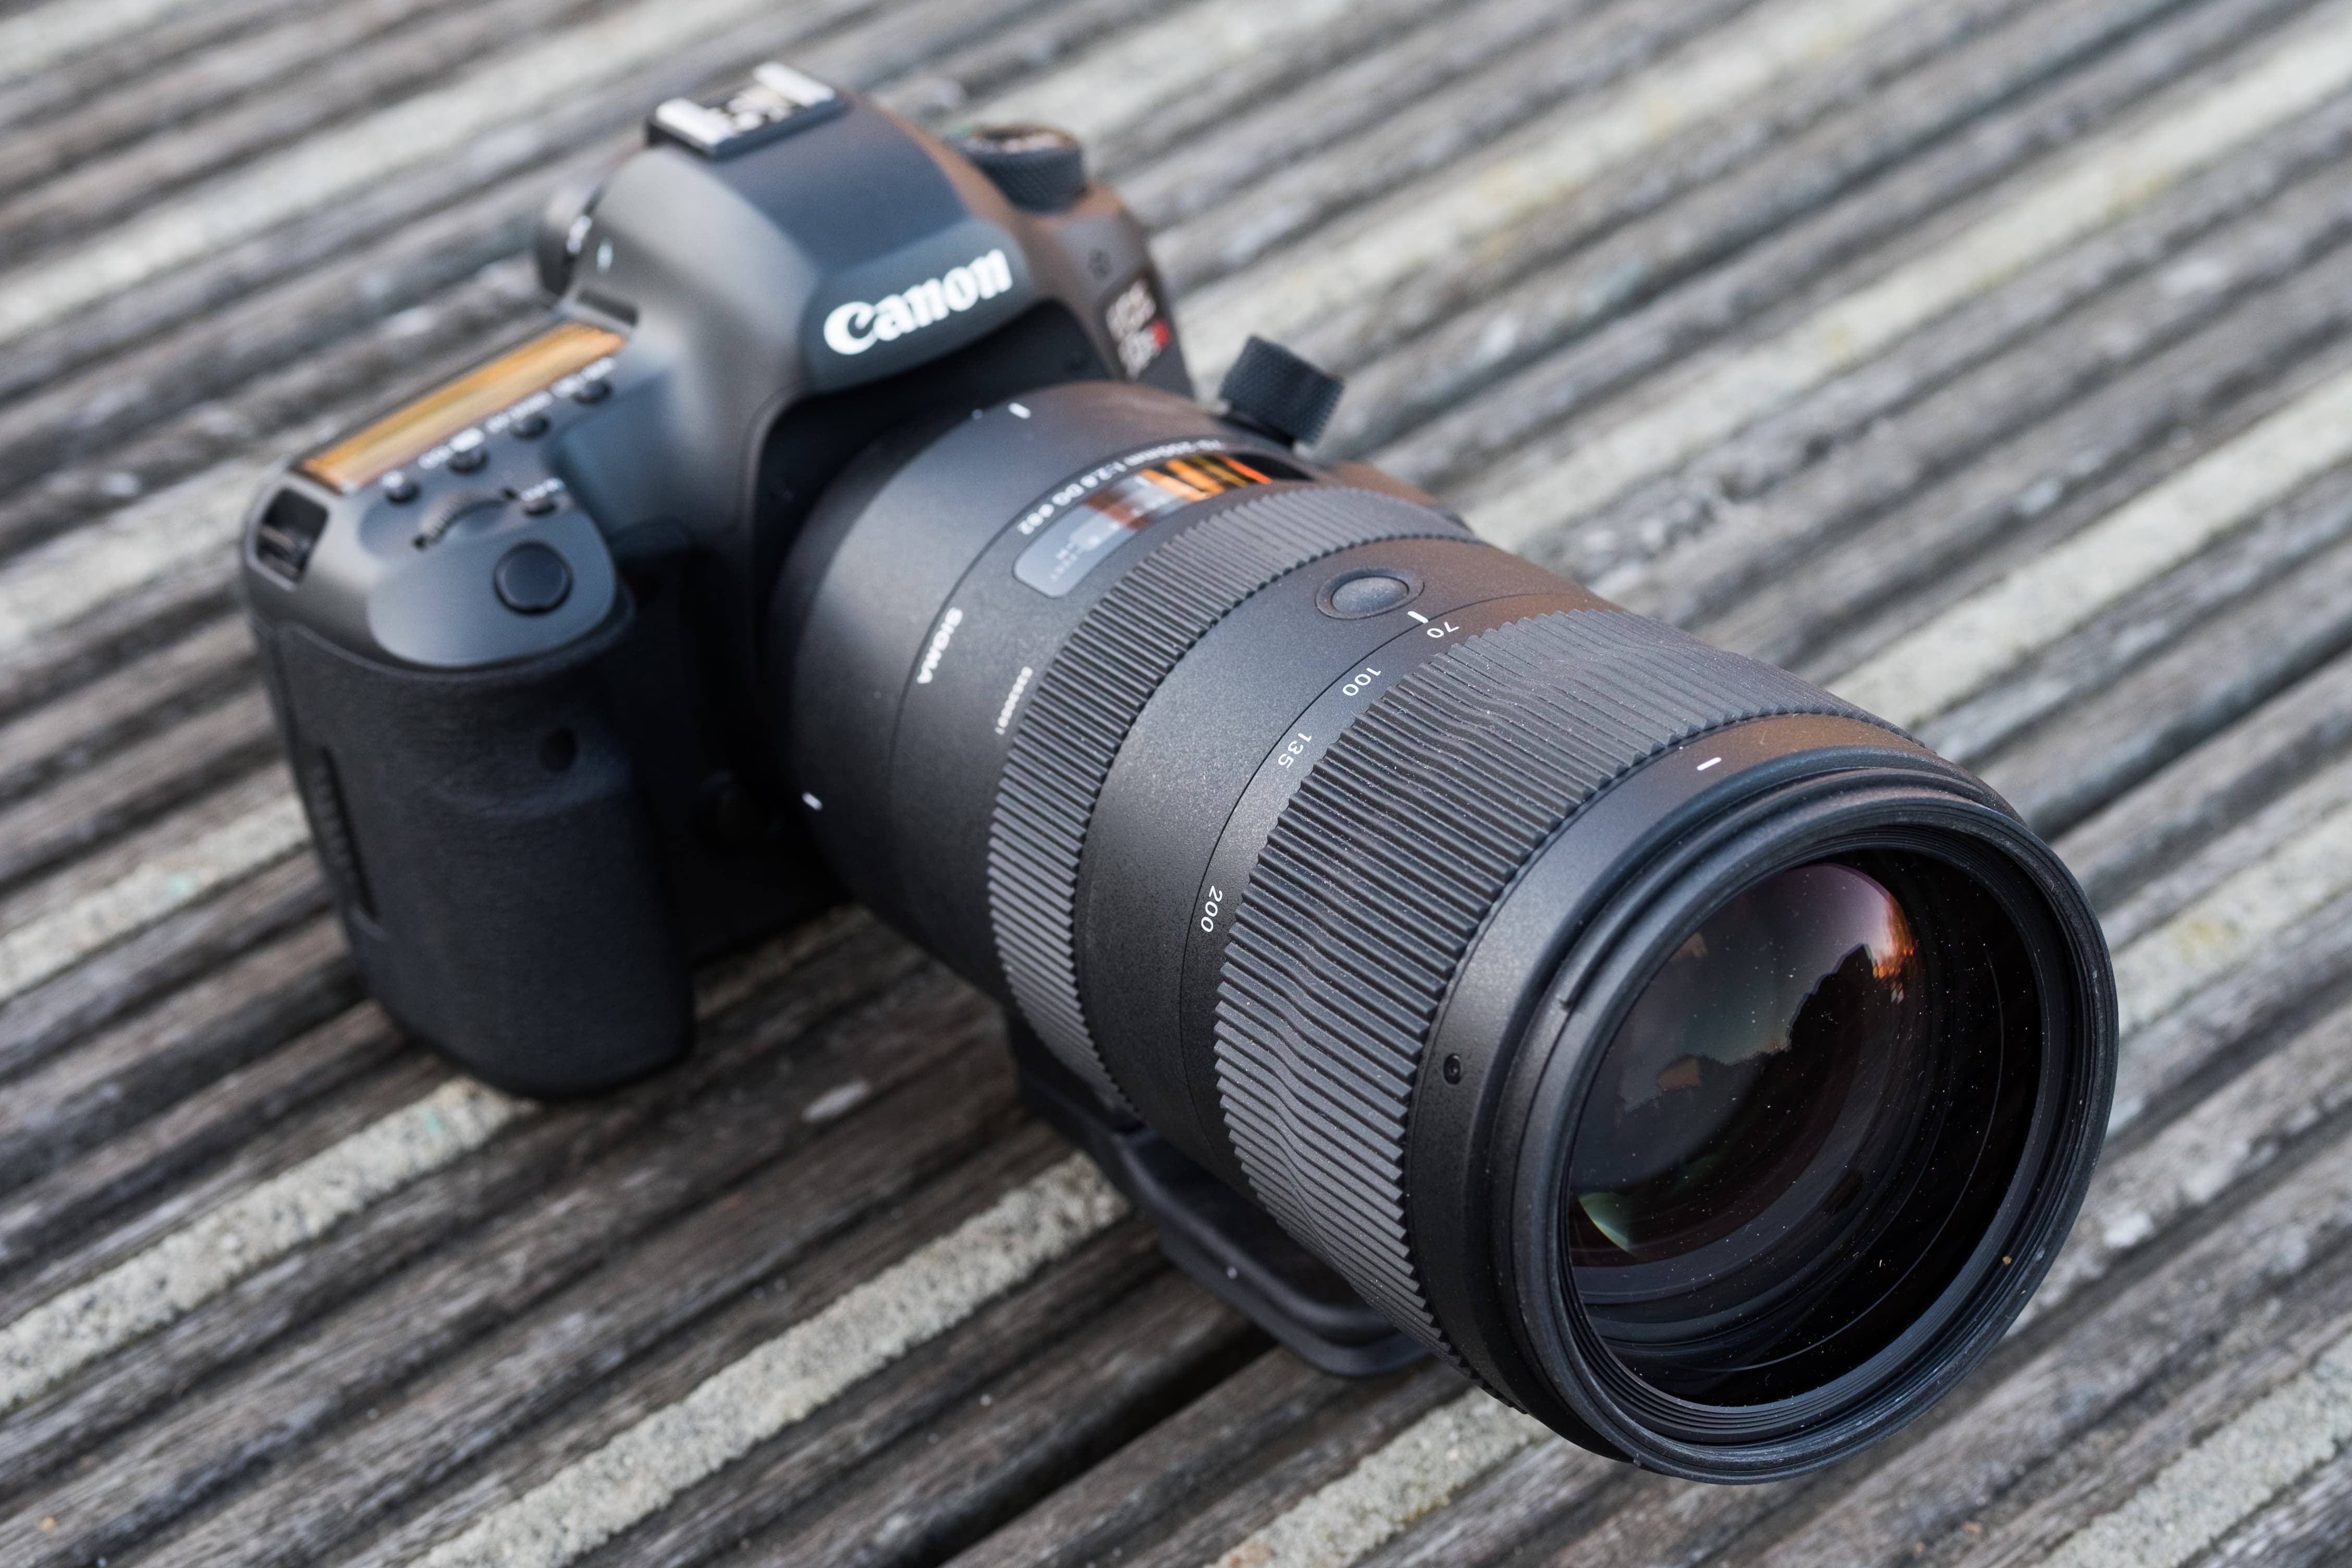 Sigma 70-200mm f/2.8 DG OS HSM Sport review